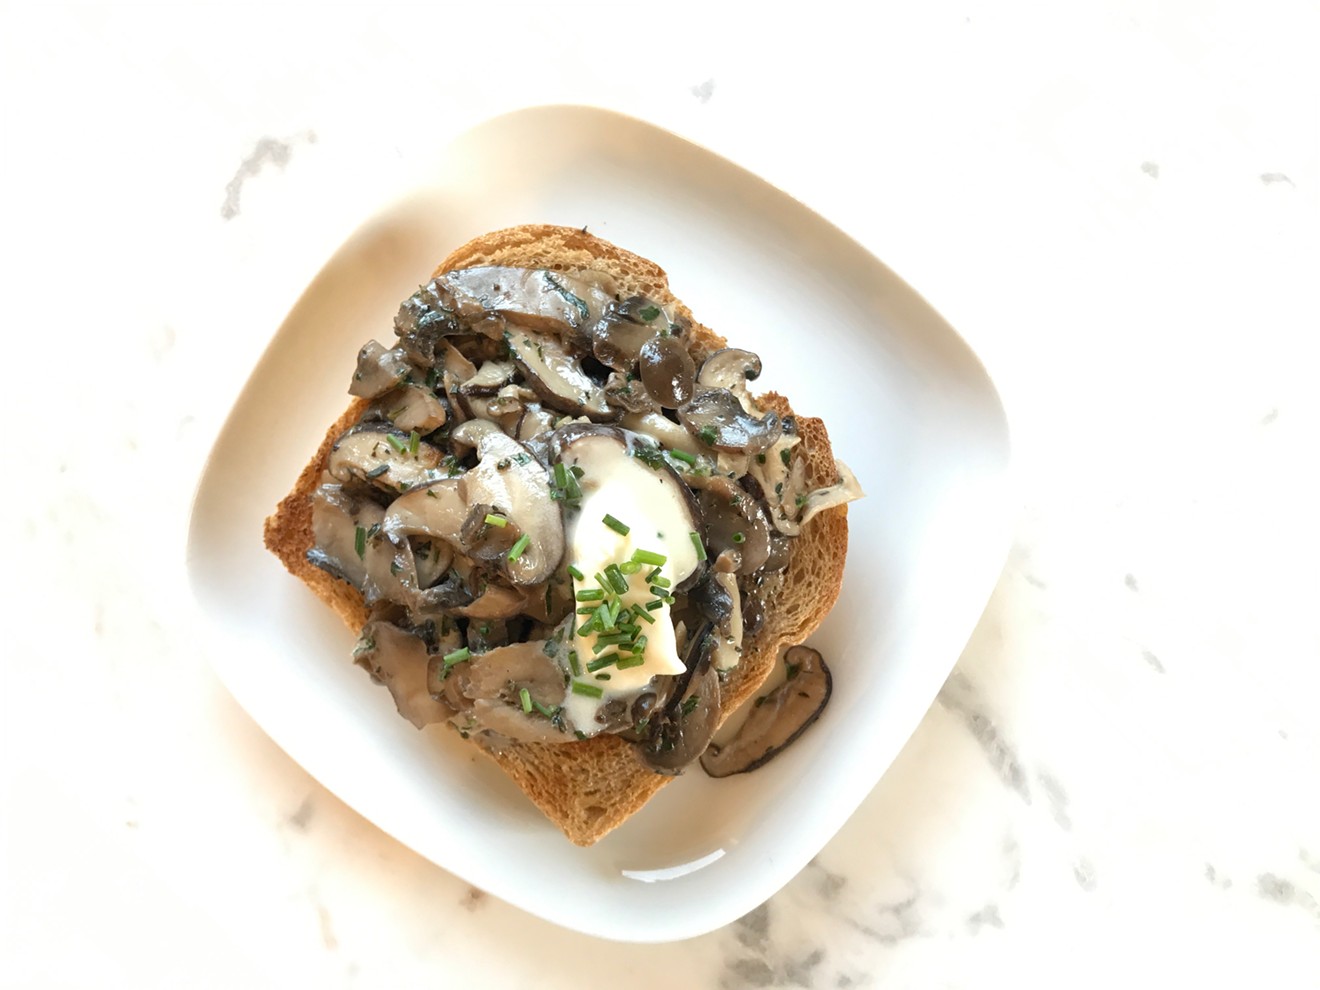 Never underestimate the power of wild mushrooms sauteed in butter.